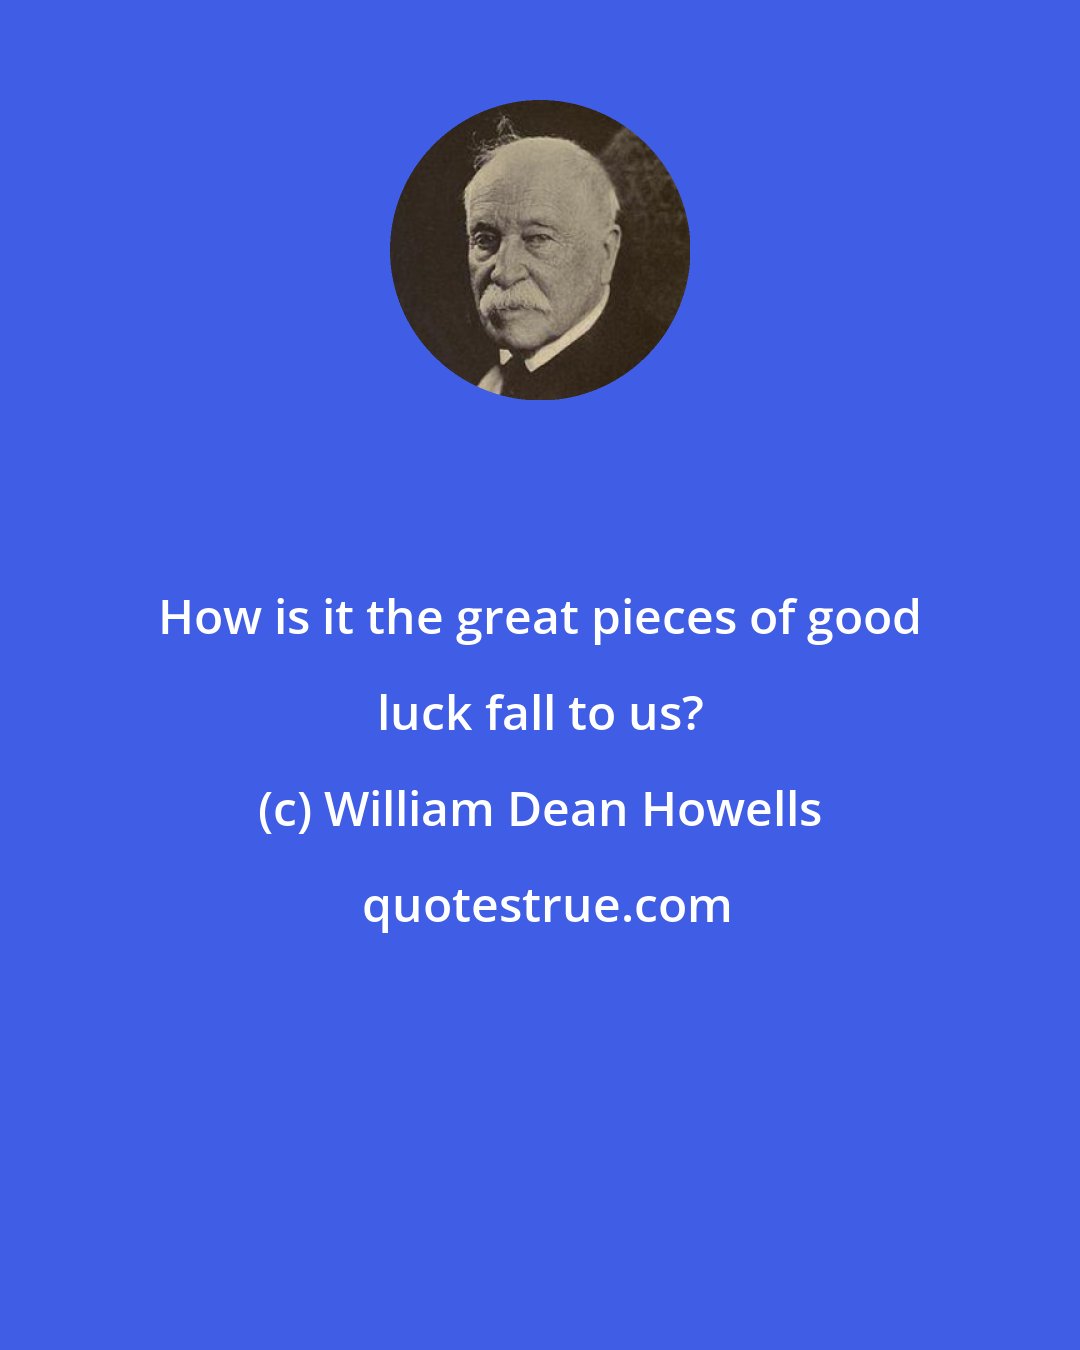 William Dean Howells: How is it the great pieces of good luck fall to us?